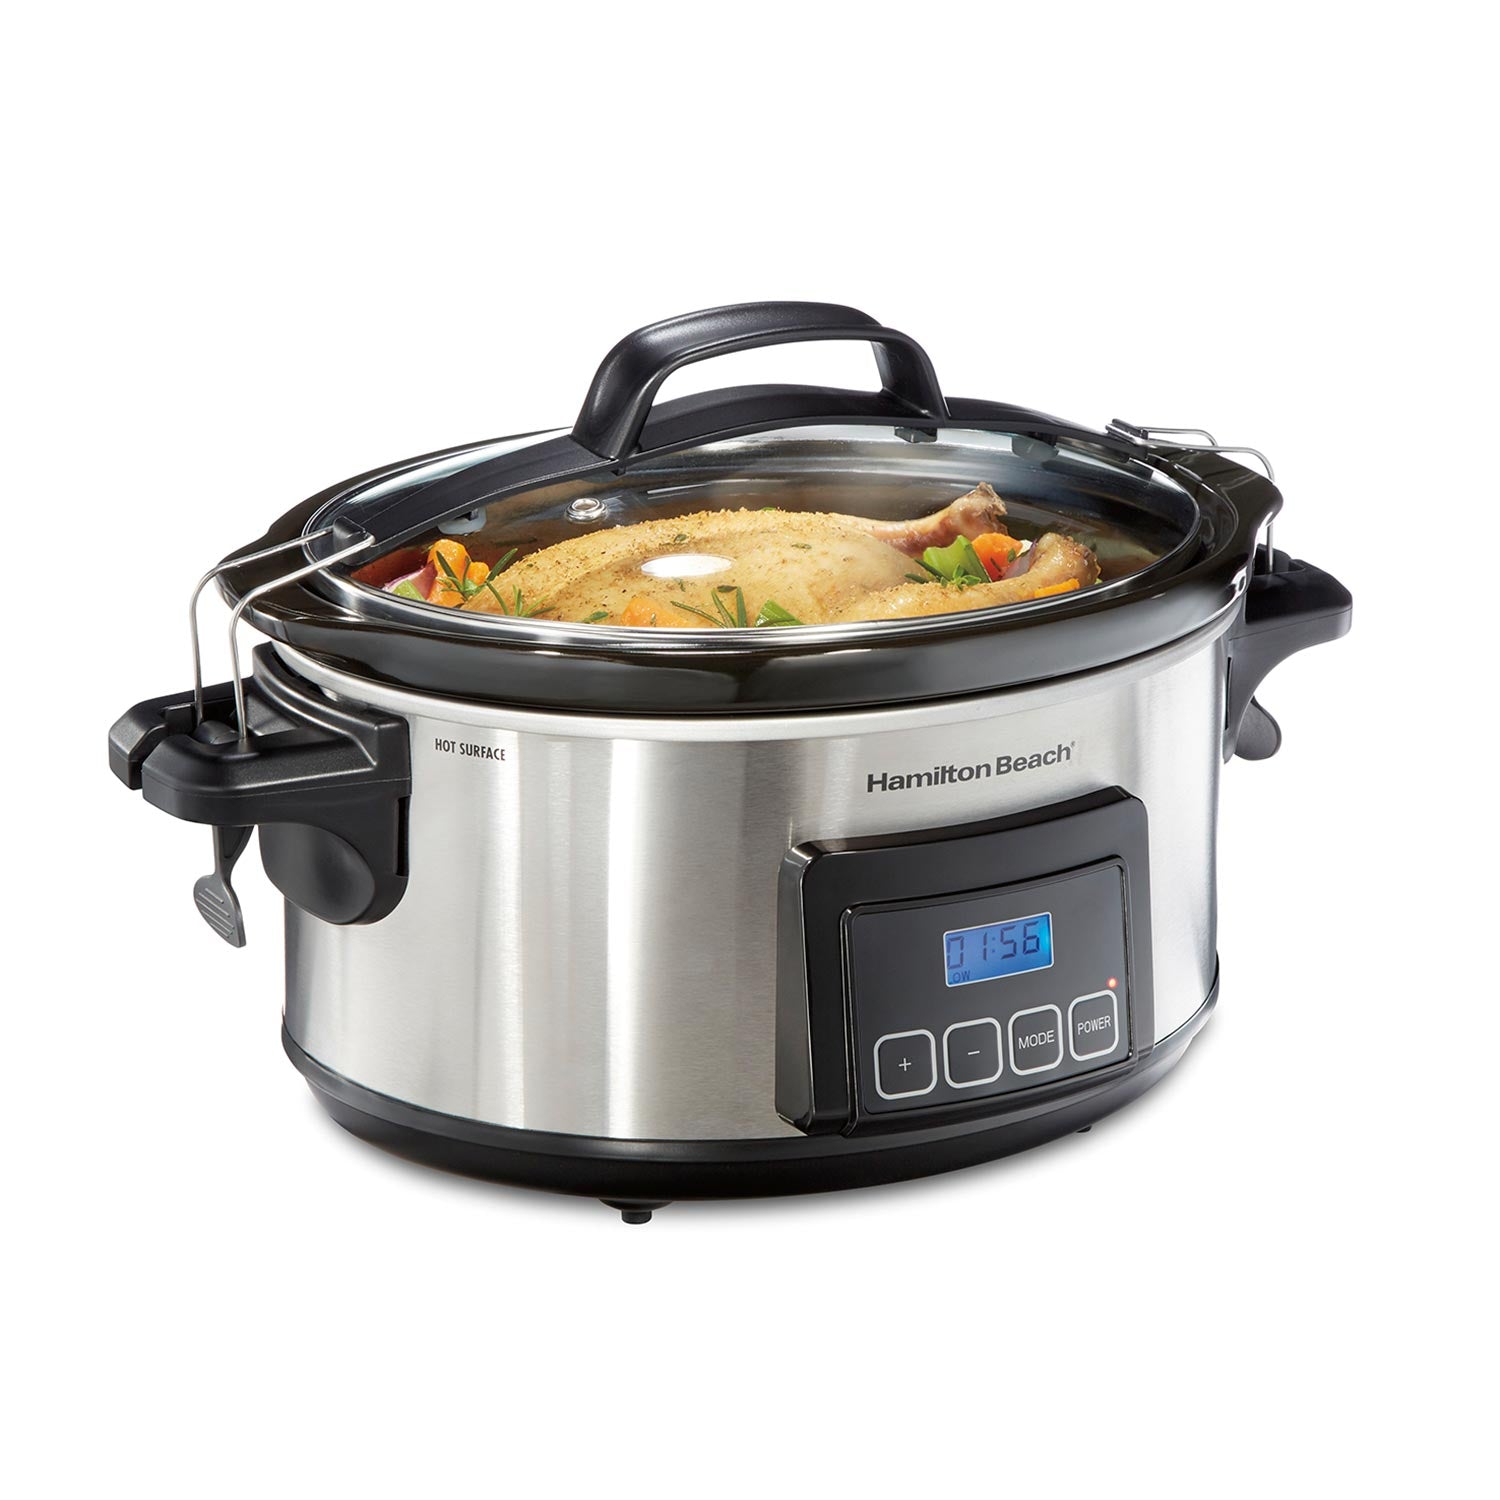 Hamilton Beach 6-Quart Stainless Steel Oval Slow Cooker in the